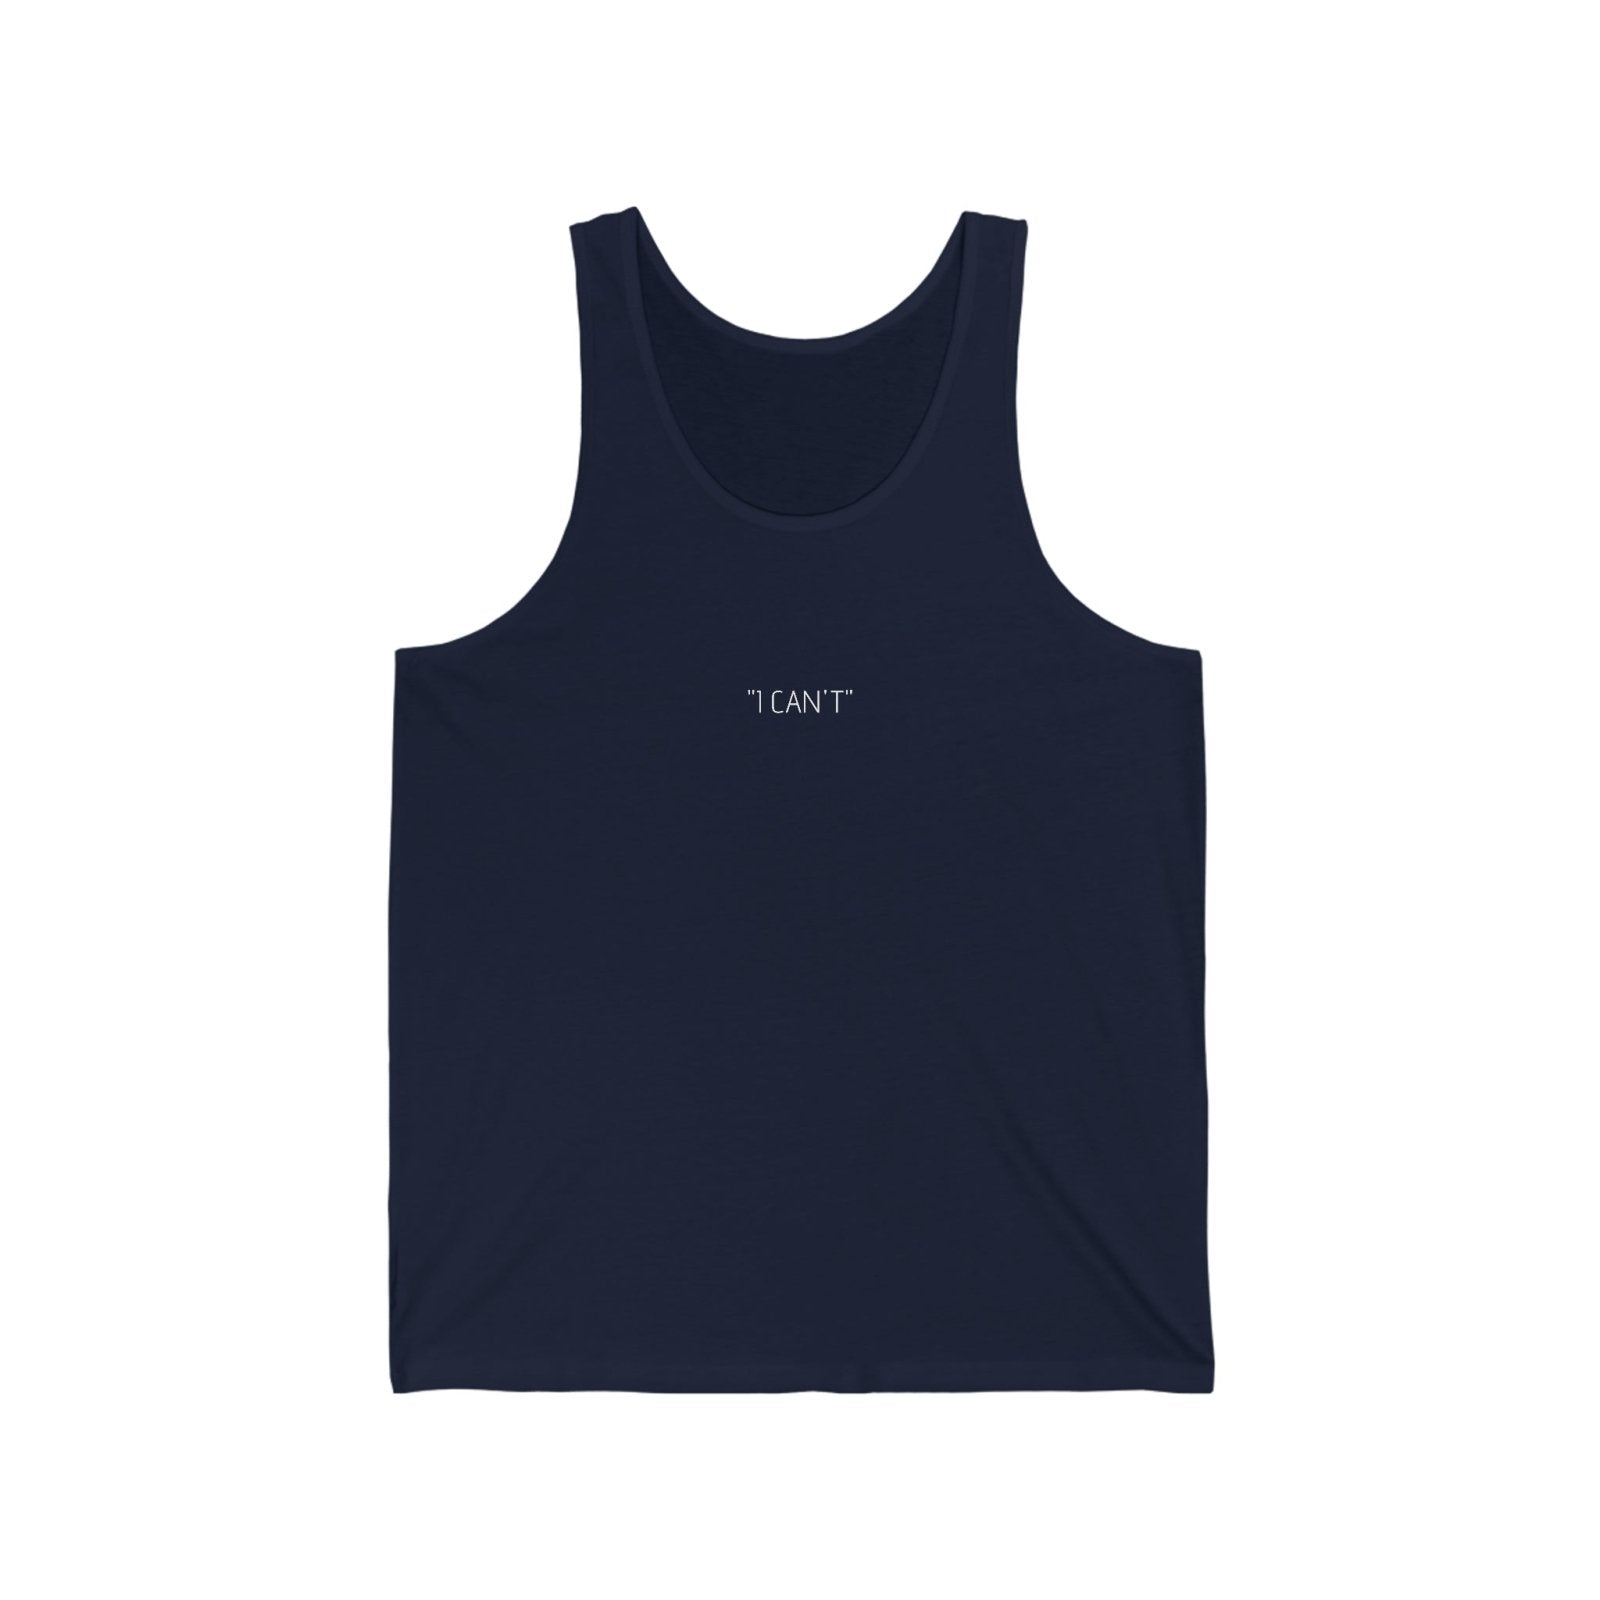 "I CAN'T" Motivational Unisex Jersey Tank - Dowding